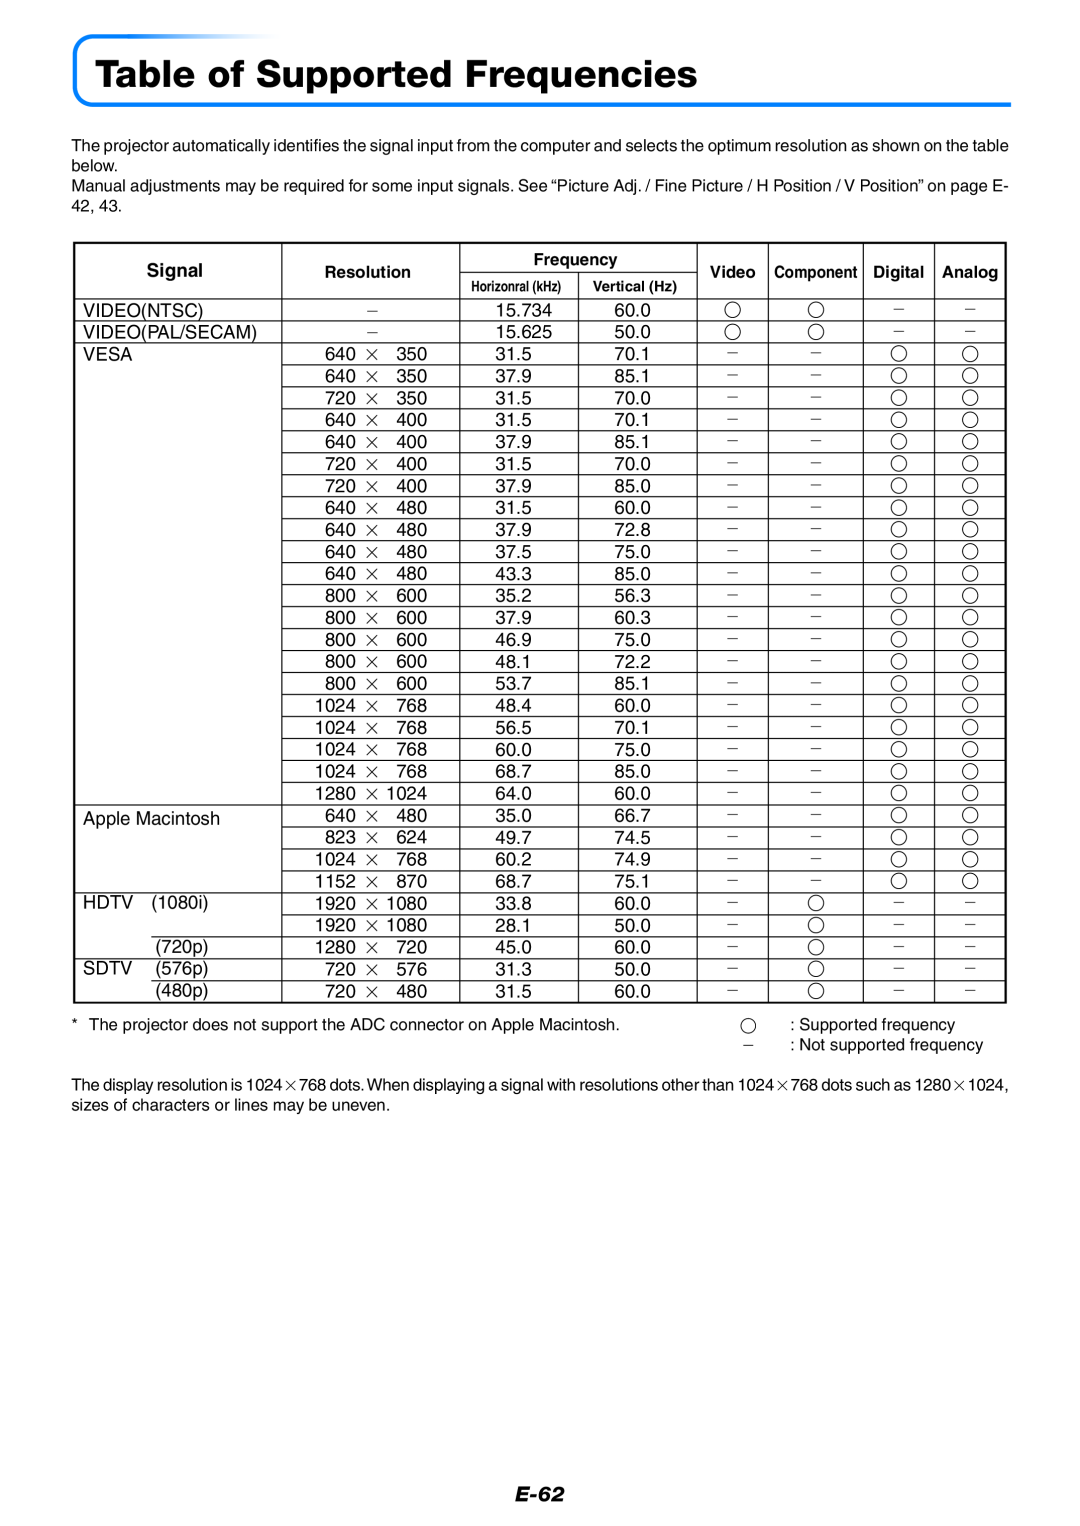 PLUS Vision U4-232 user manual Table of Supported Frequencies, E-62, Signal 